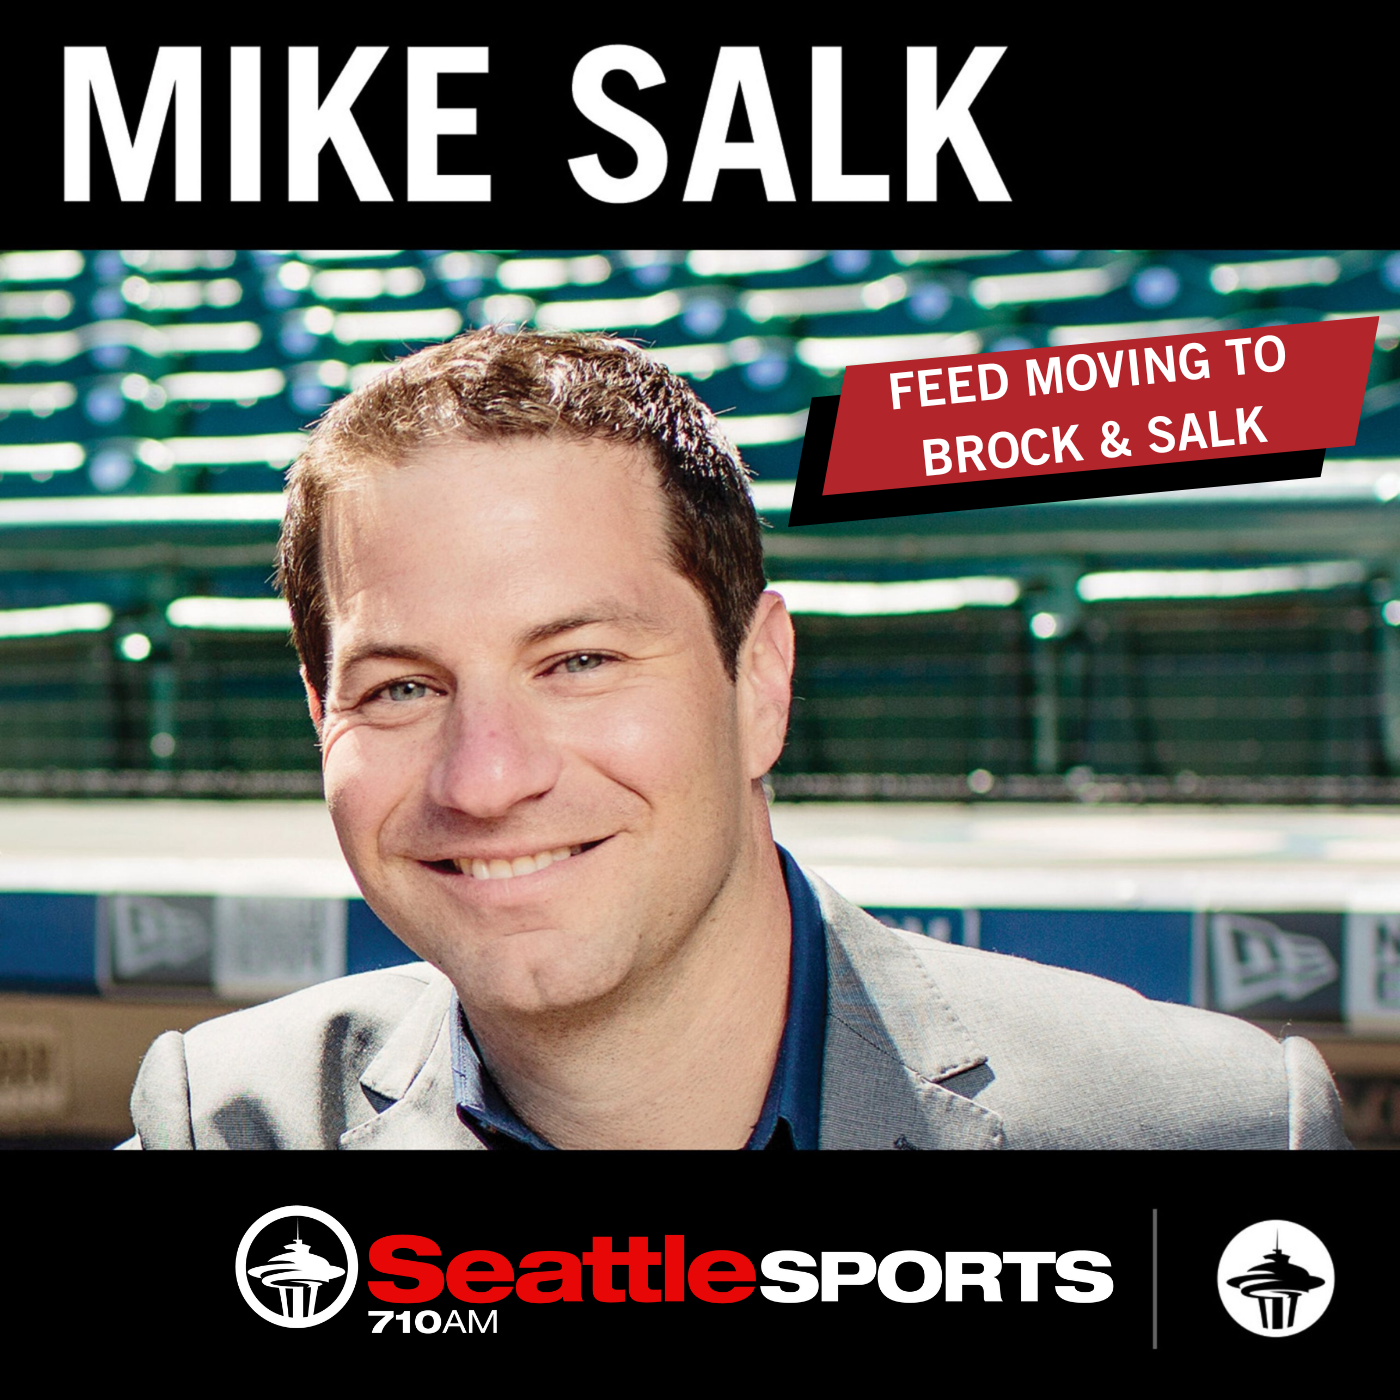 Former Seahawks LB KJ Wright's Sit Down with Salk (full interview)